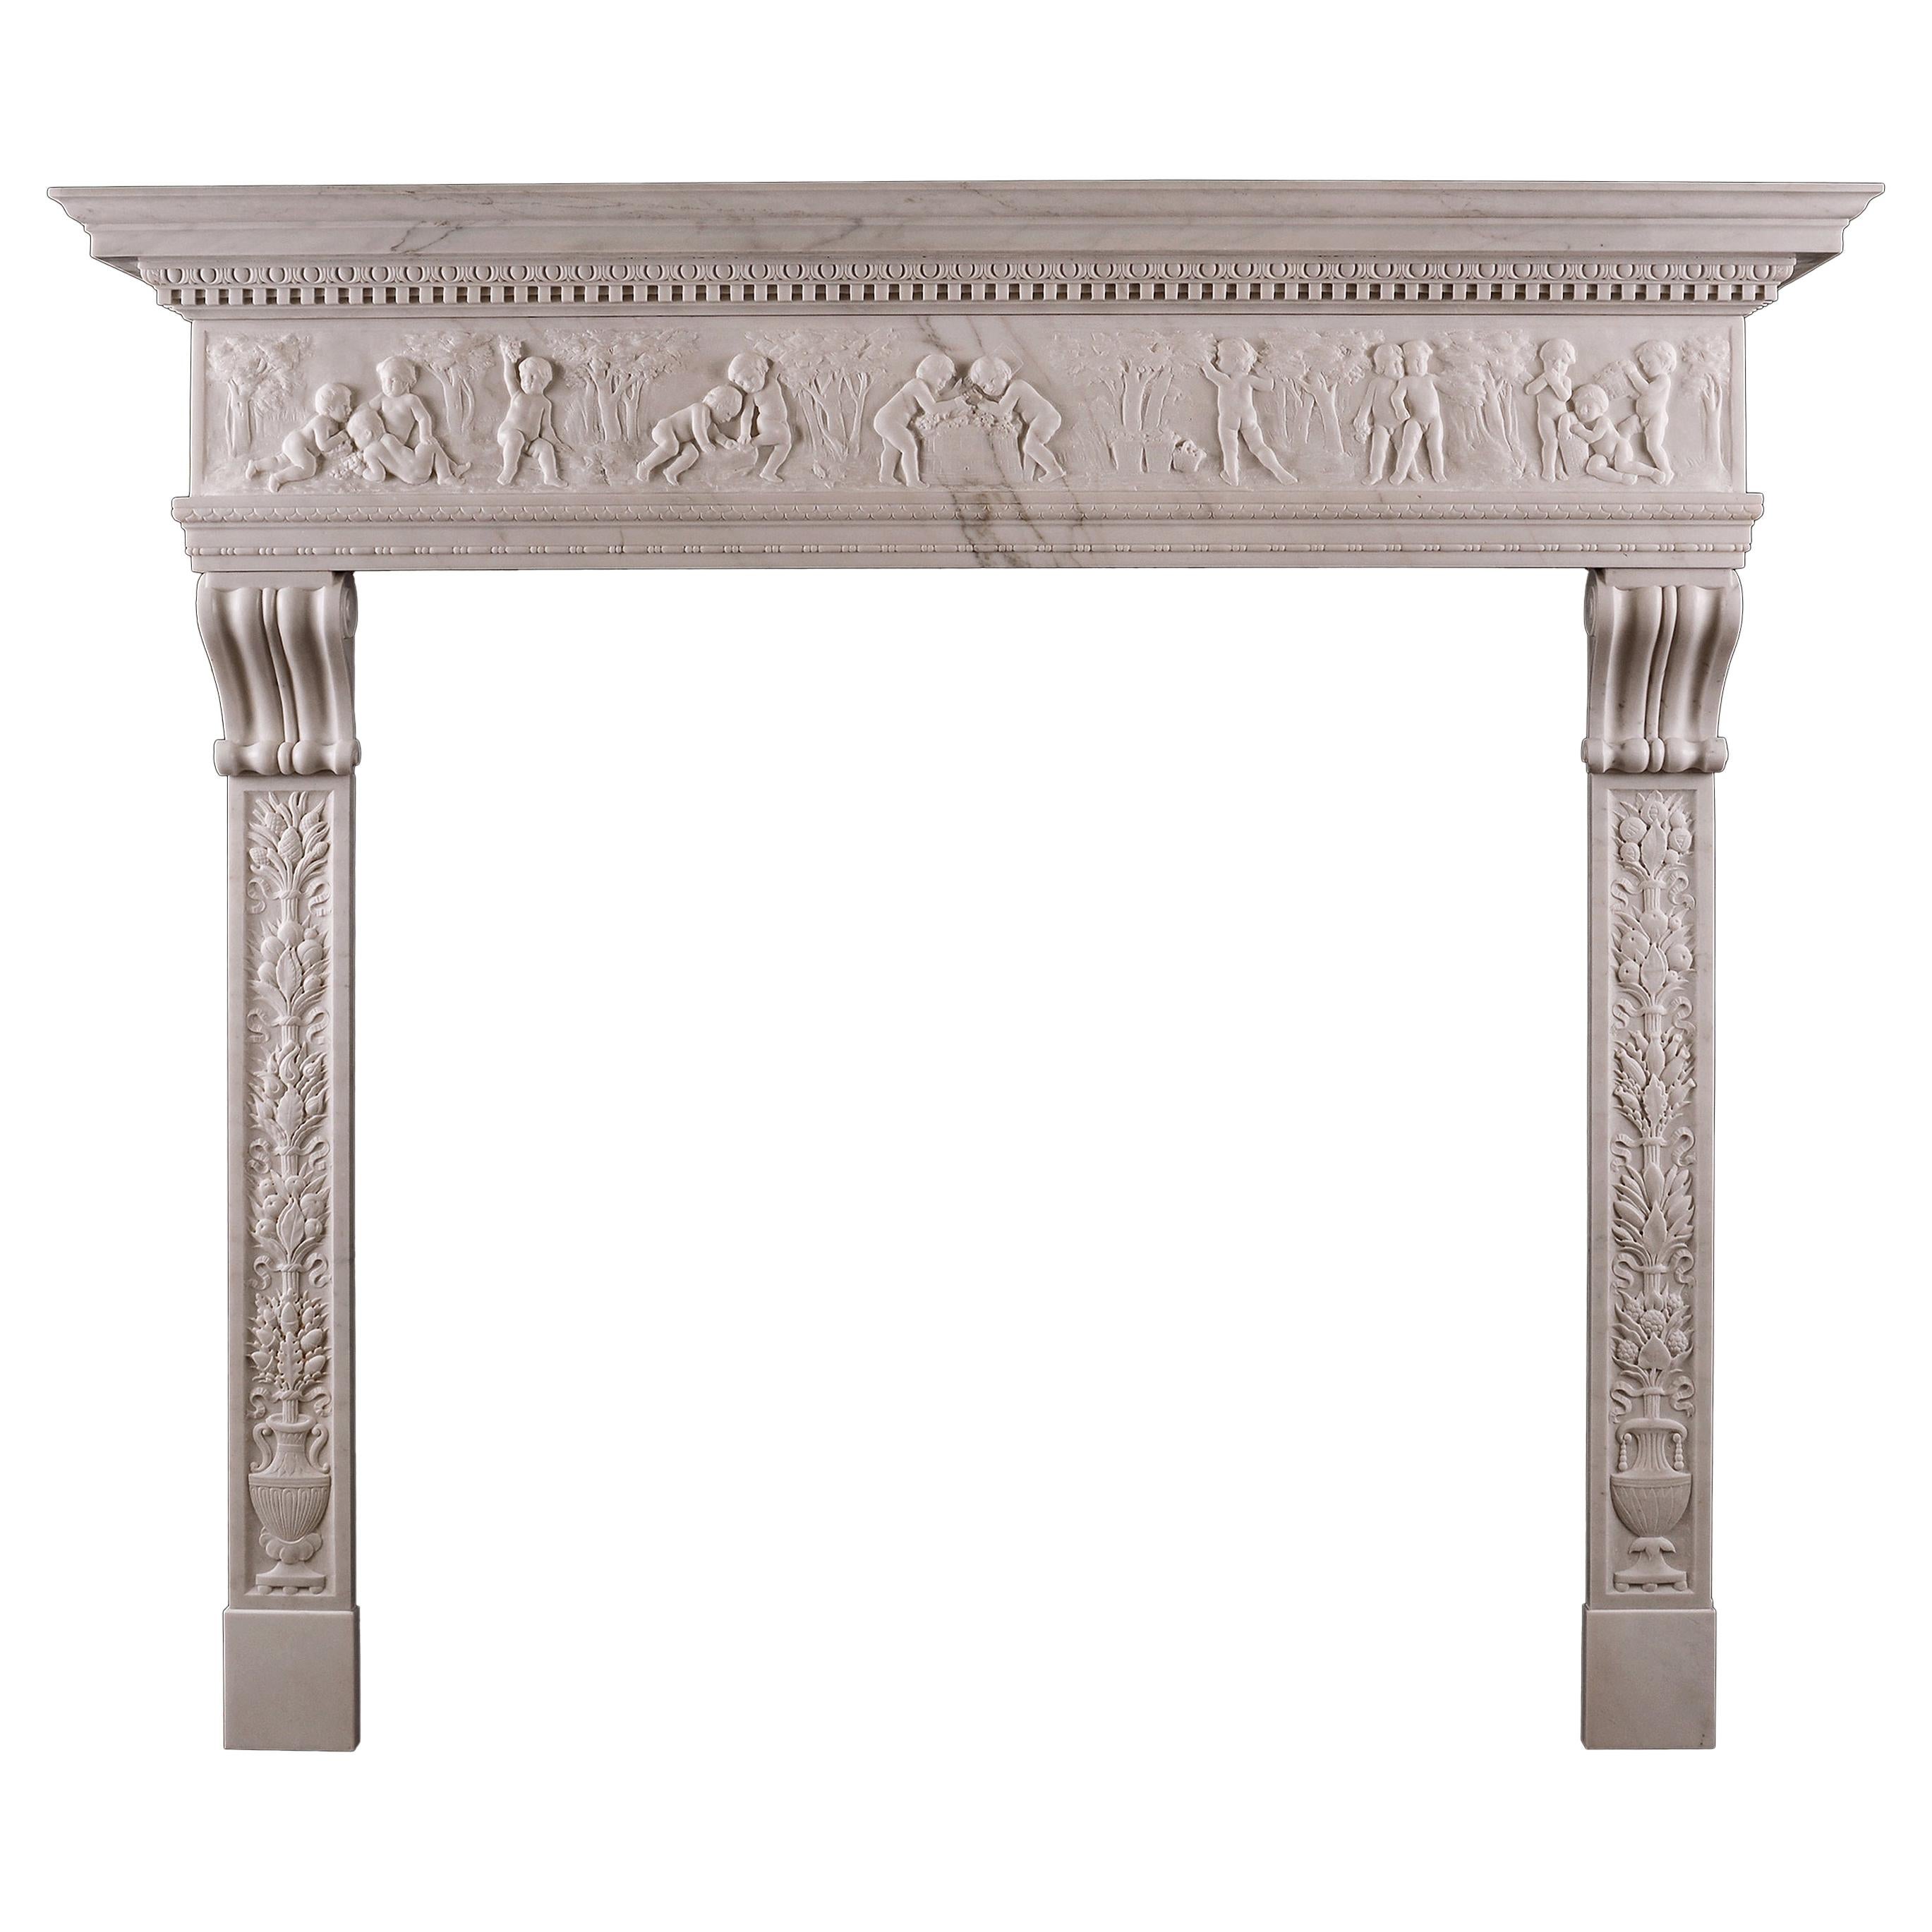 Very Fine Statuary White Marble Fireplace in the Italian Renaissance Manner